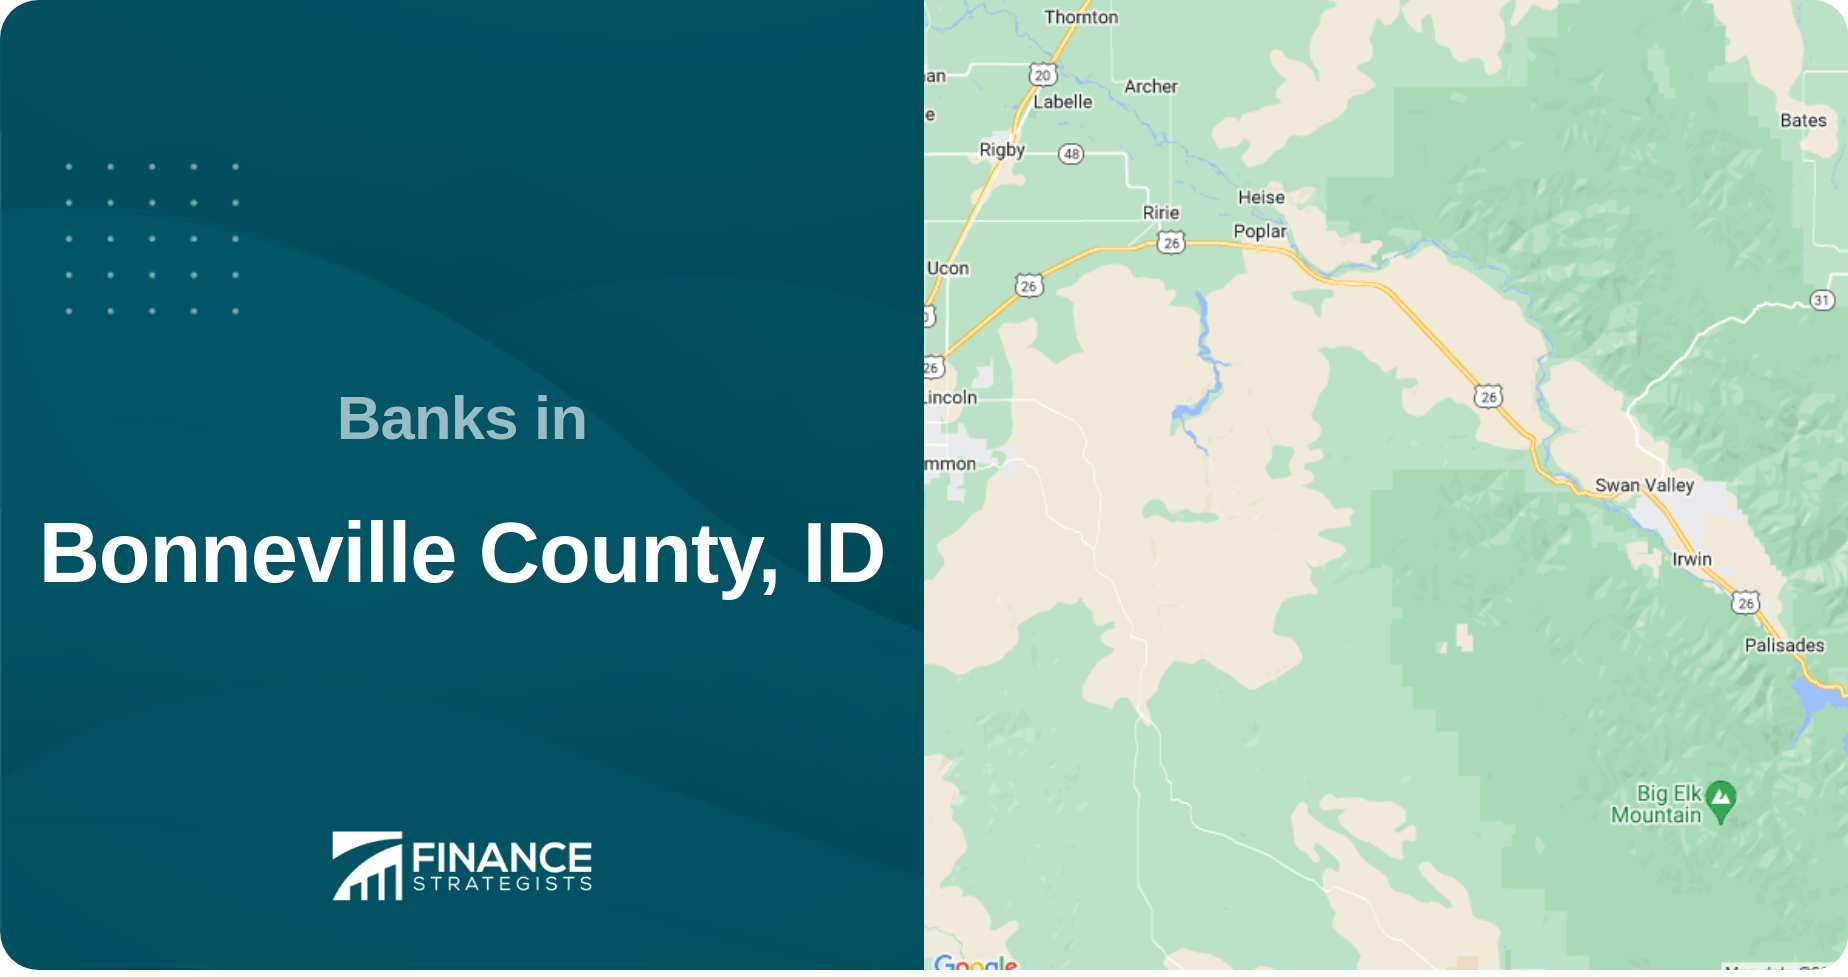 Banks in Bonneville County, ID